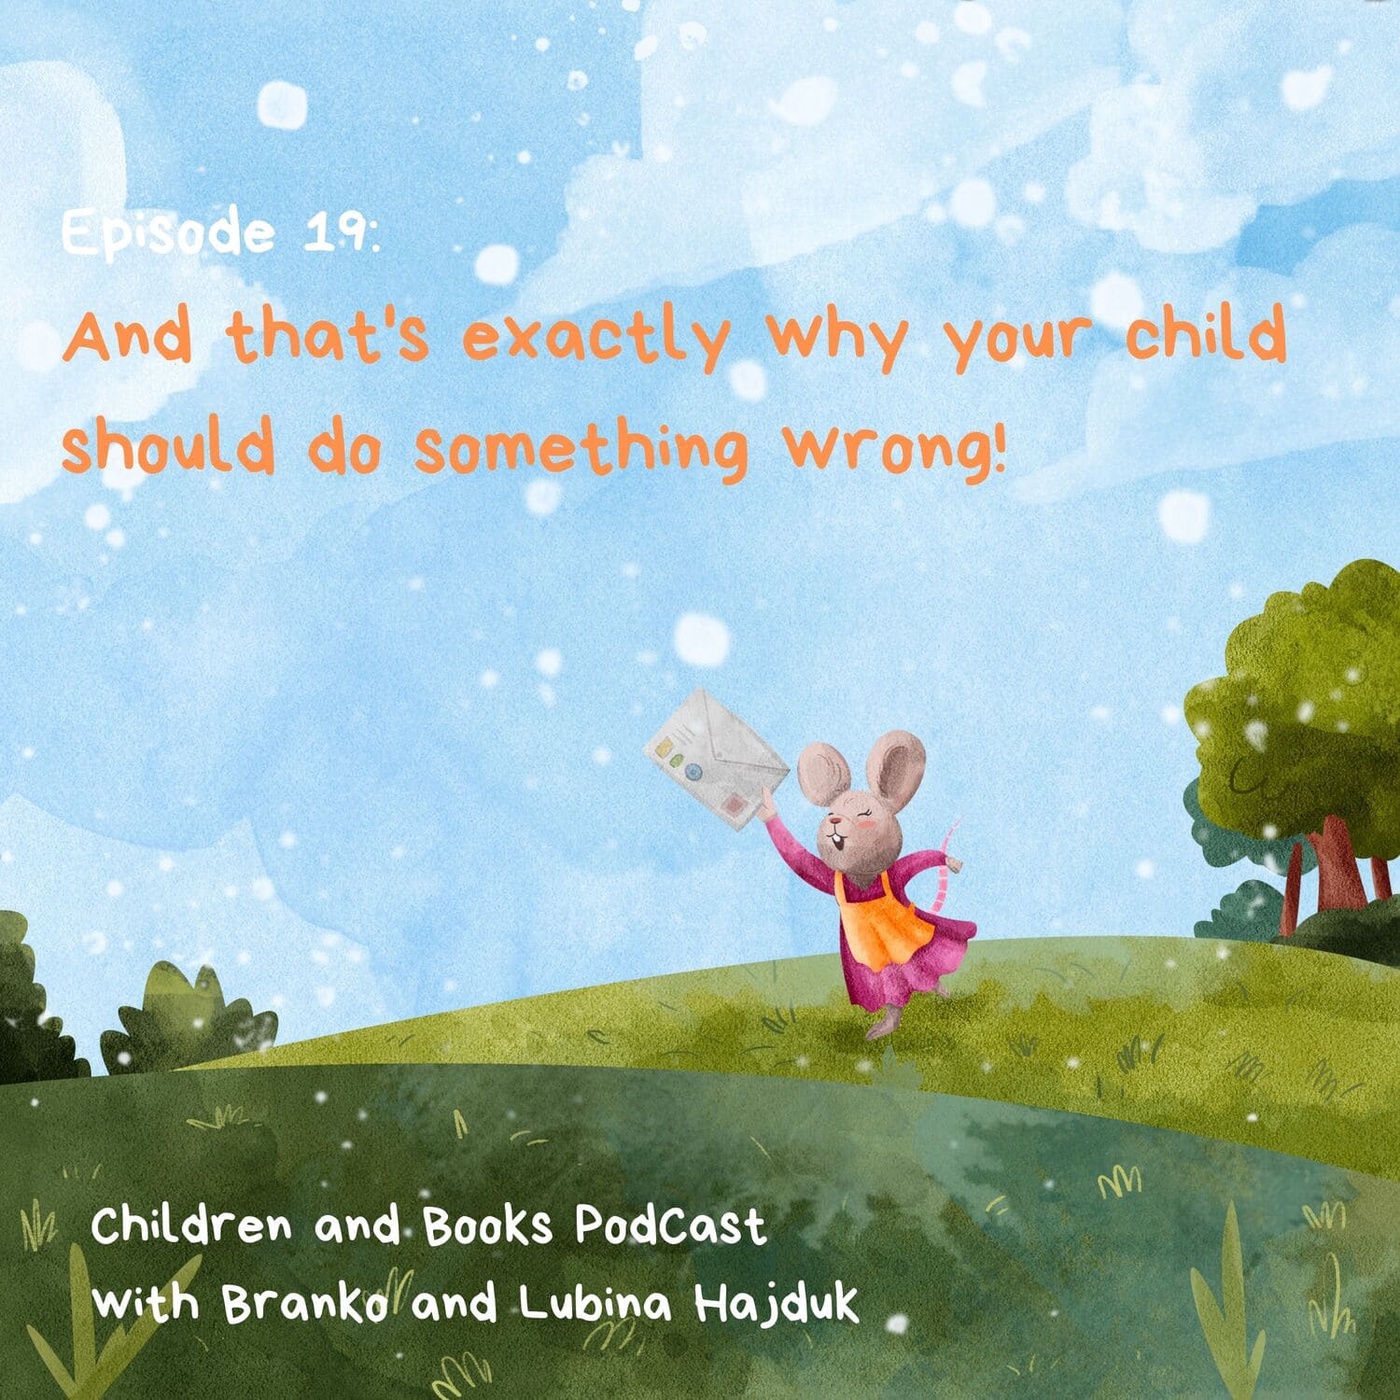 And that's exactly why your child should do something wrong! - Children and books